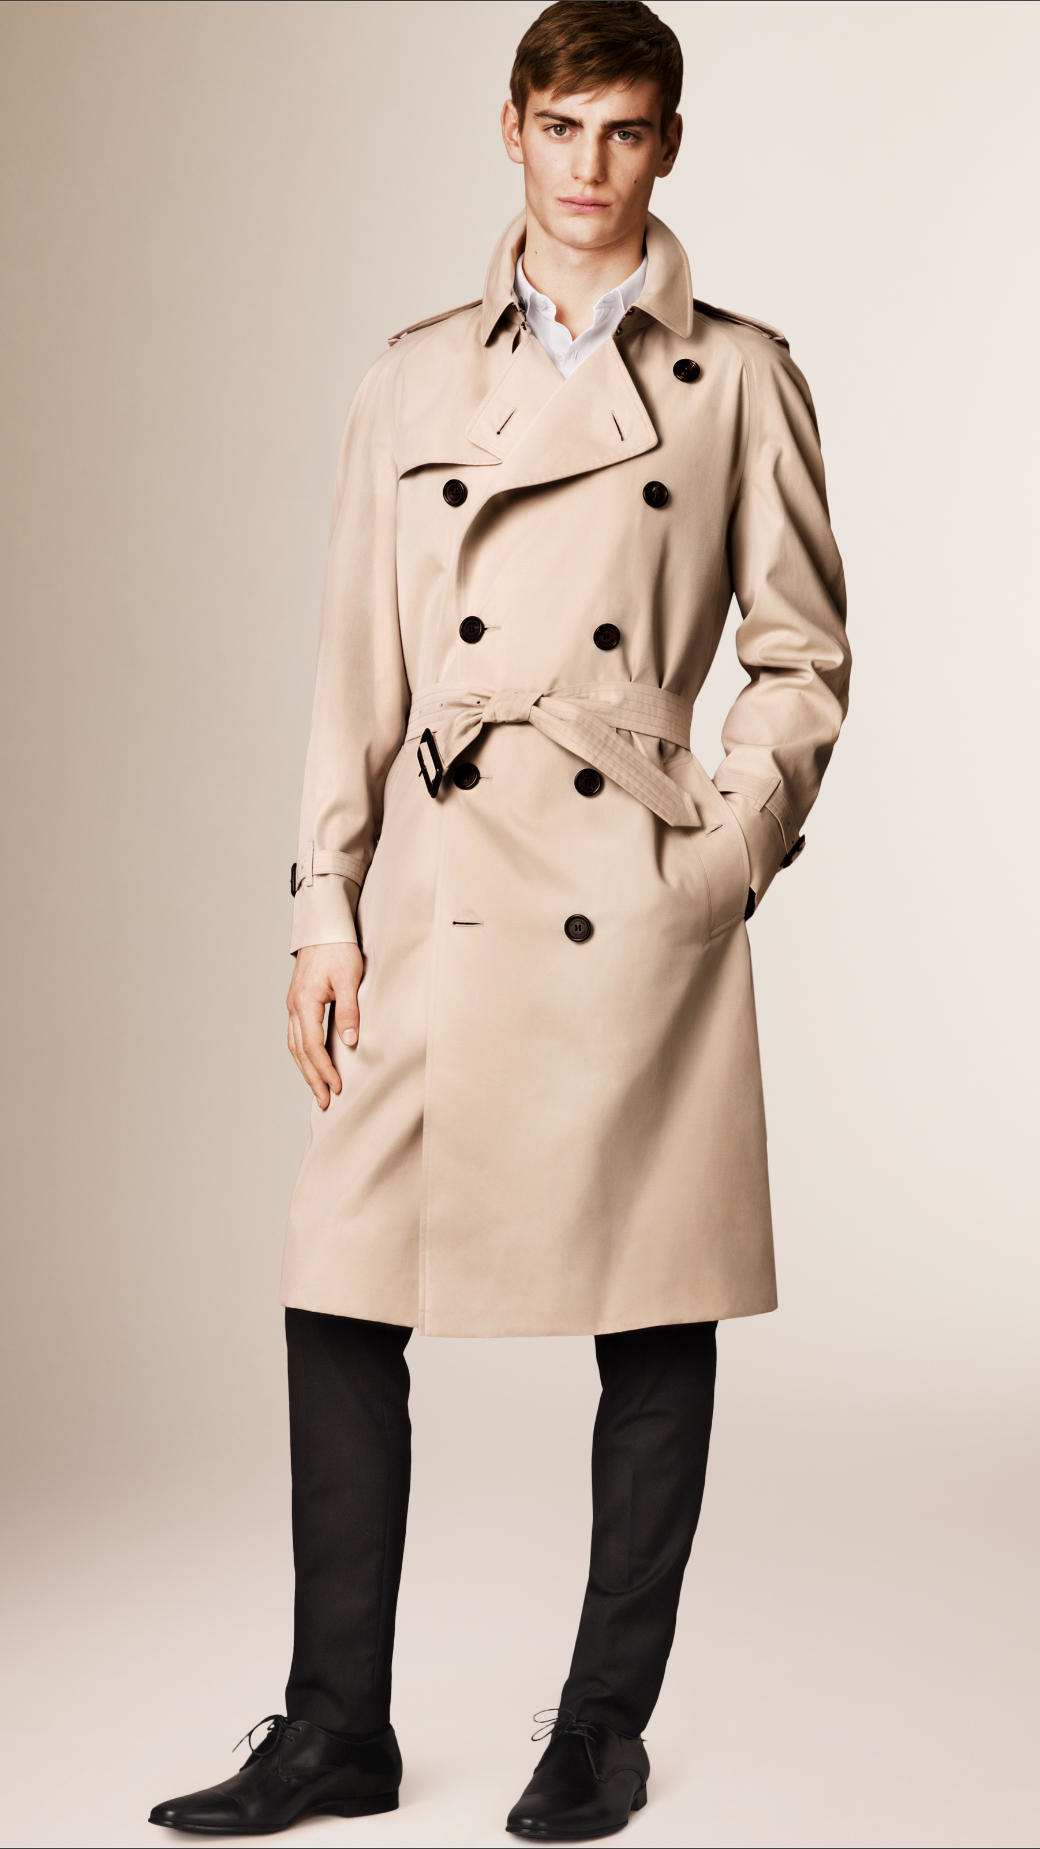 Lyst - Burberry The Westminster - Long Heritage Trench Coat in Natural for Men